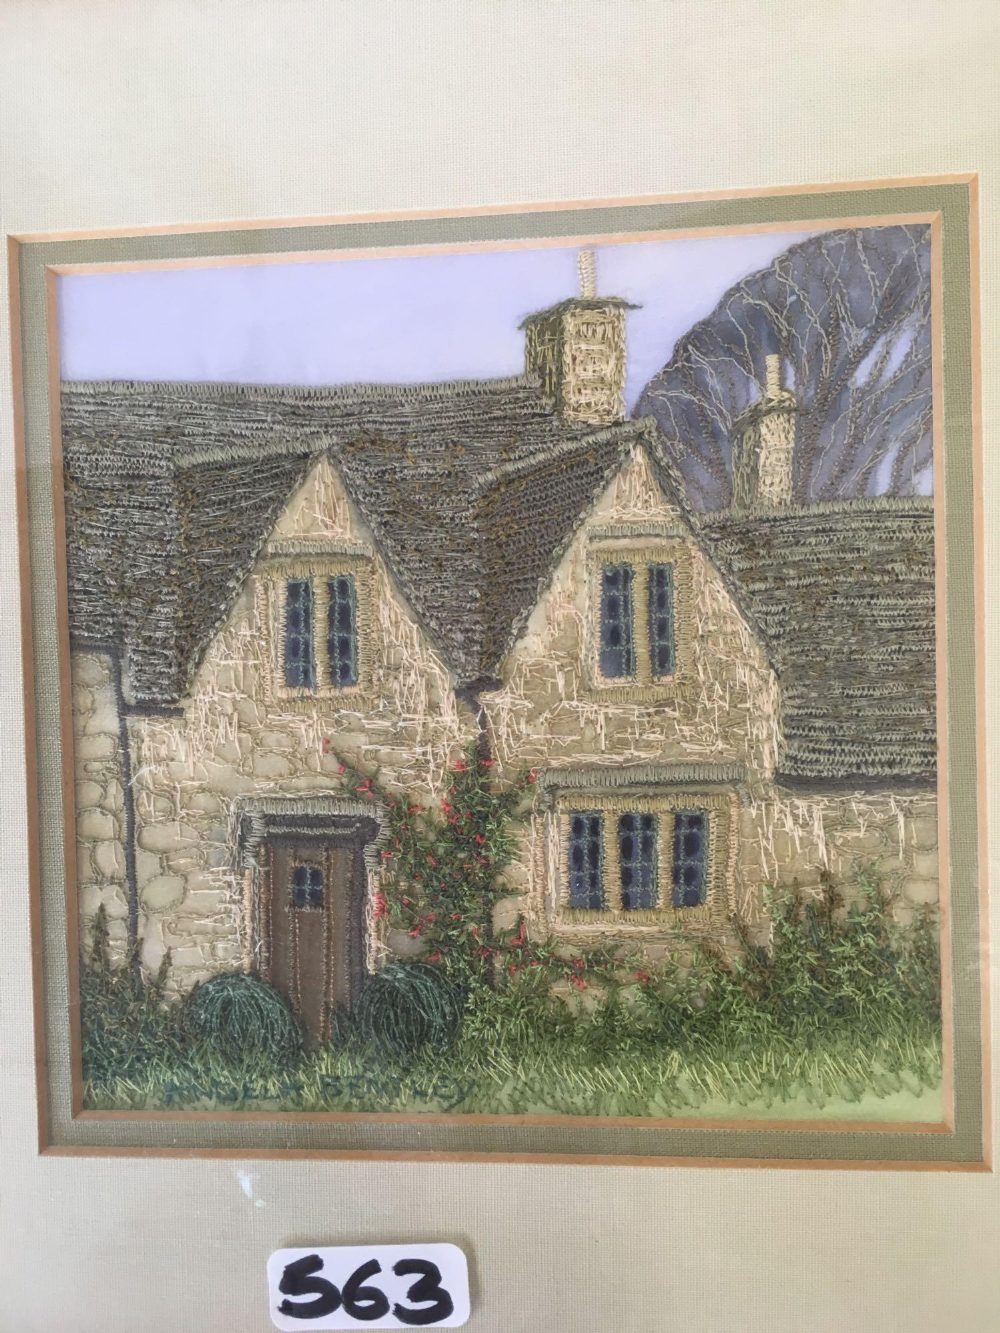 SILK WORK PICTURE OF A BIRD ON A BRANCH TOGETHER WITH EMBROIDERED PICTURE OF COTSWOLD COTTAGES - Image 4 of 5